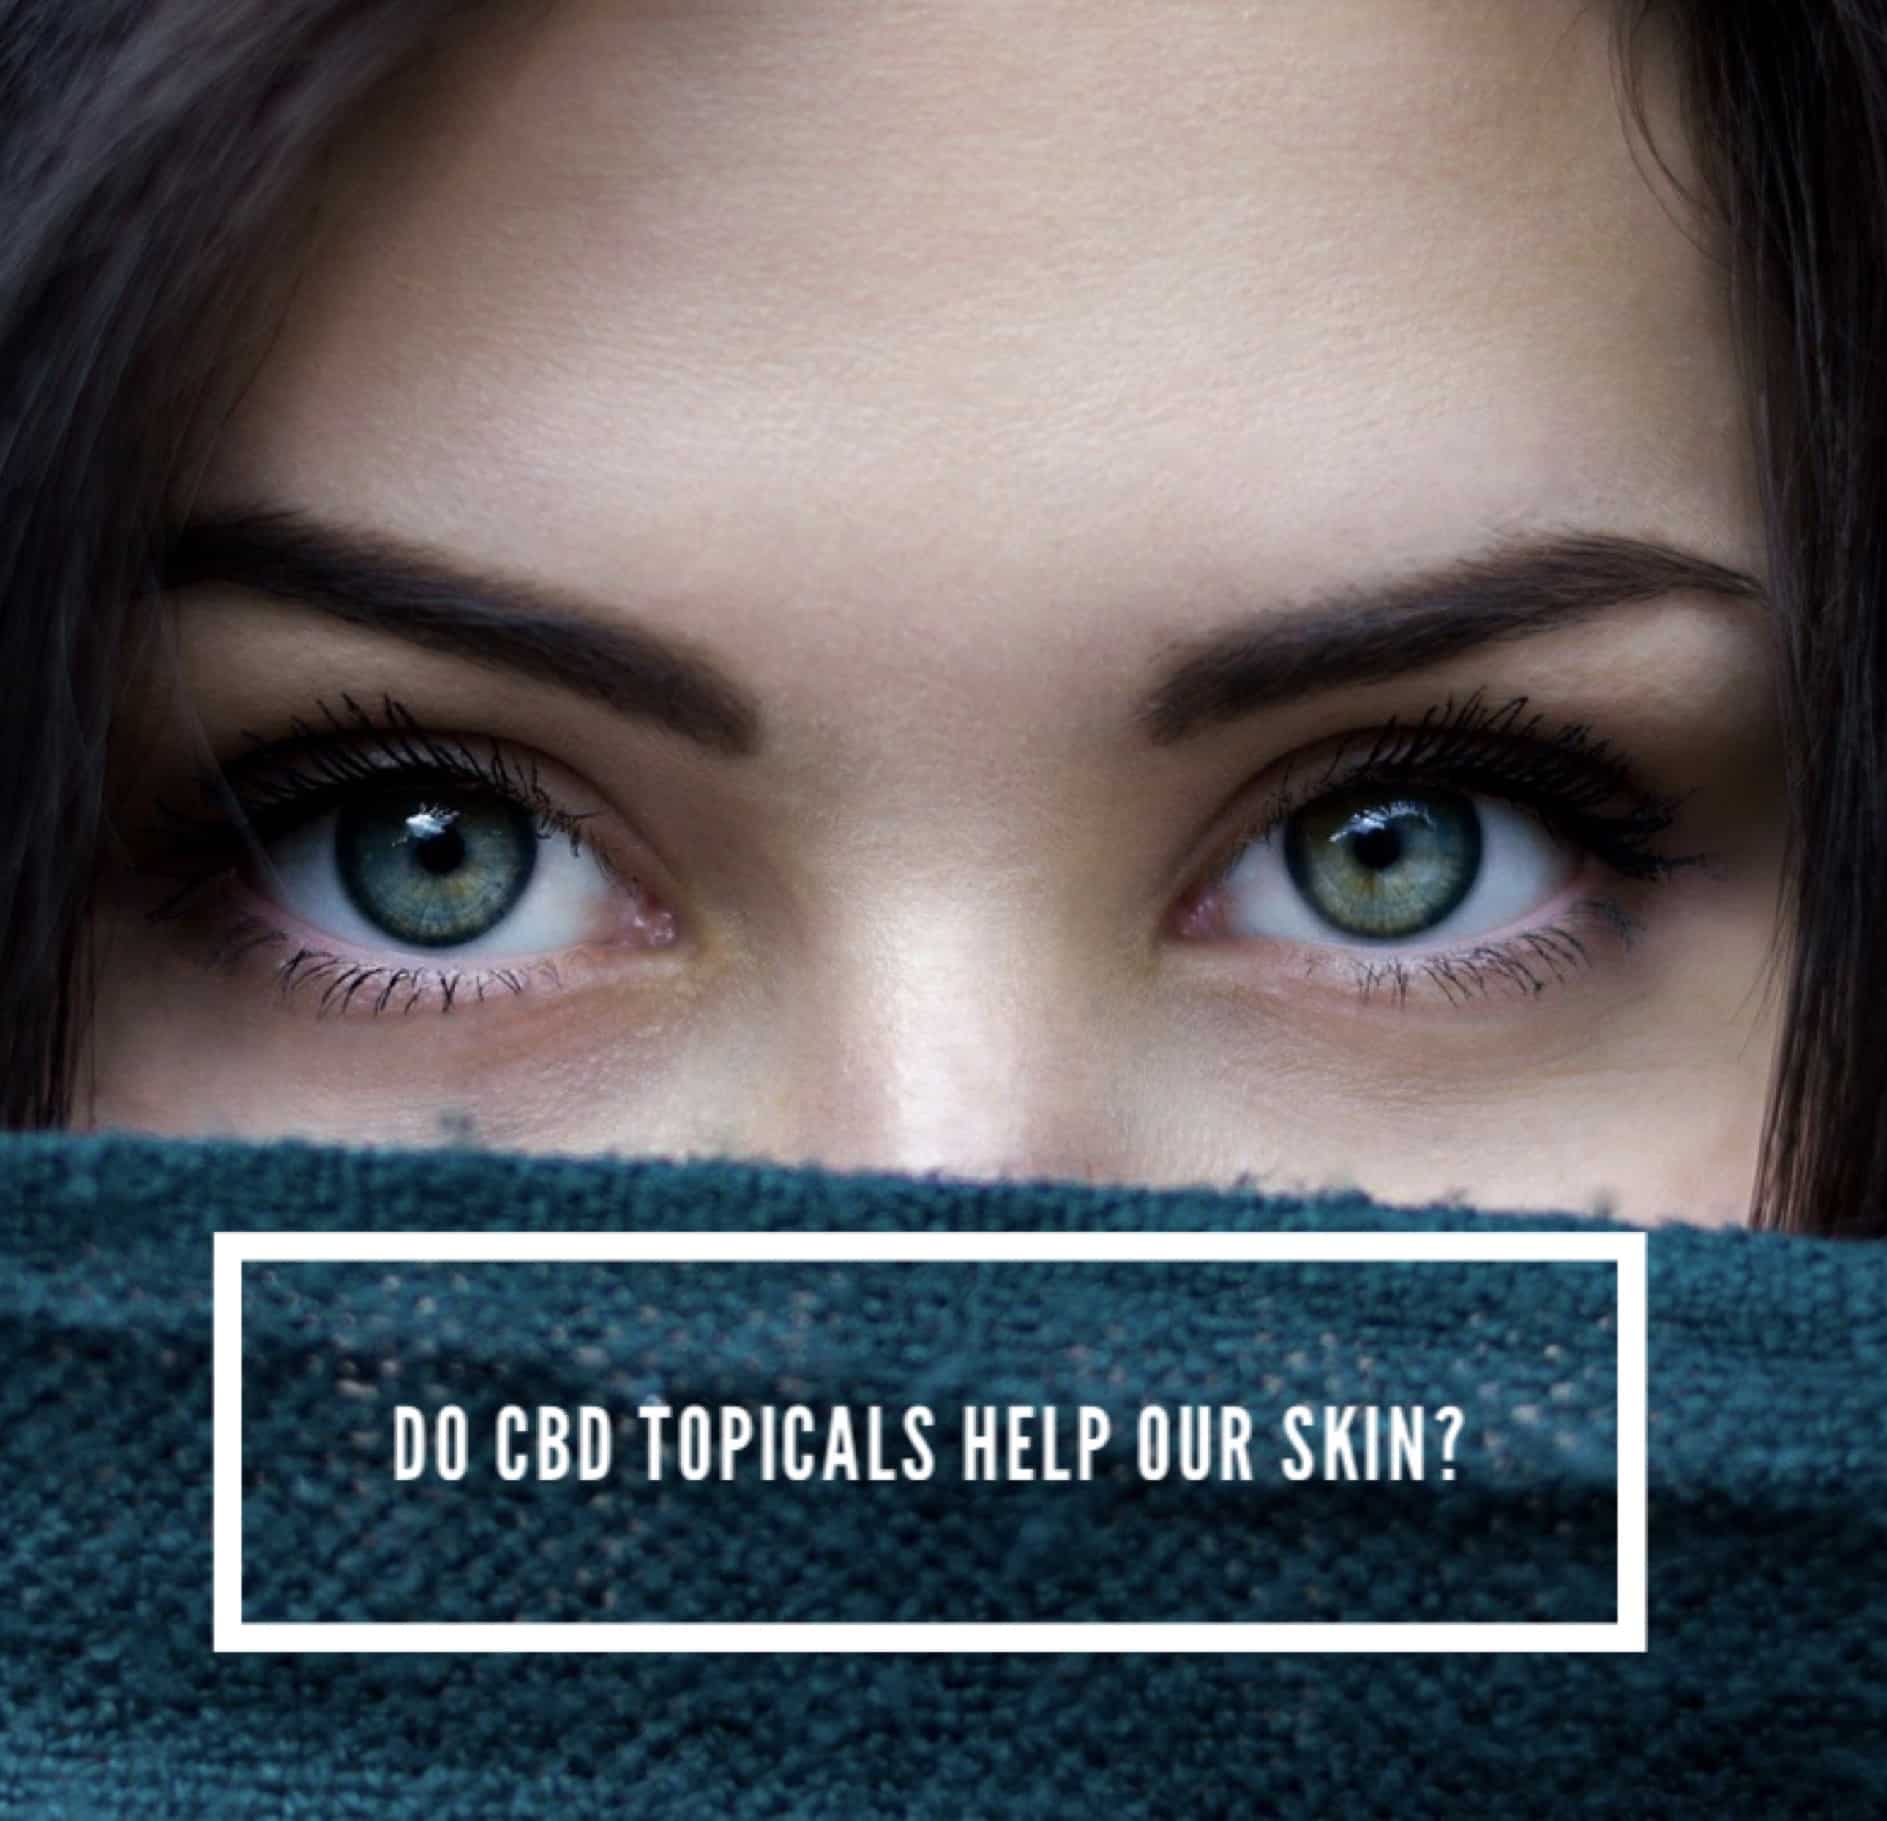 Can CBD Topicals Help Our Skin?